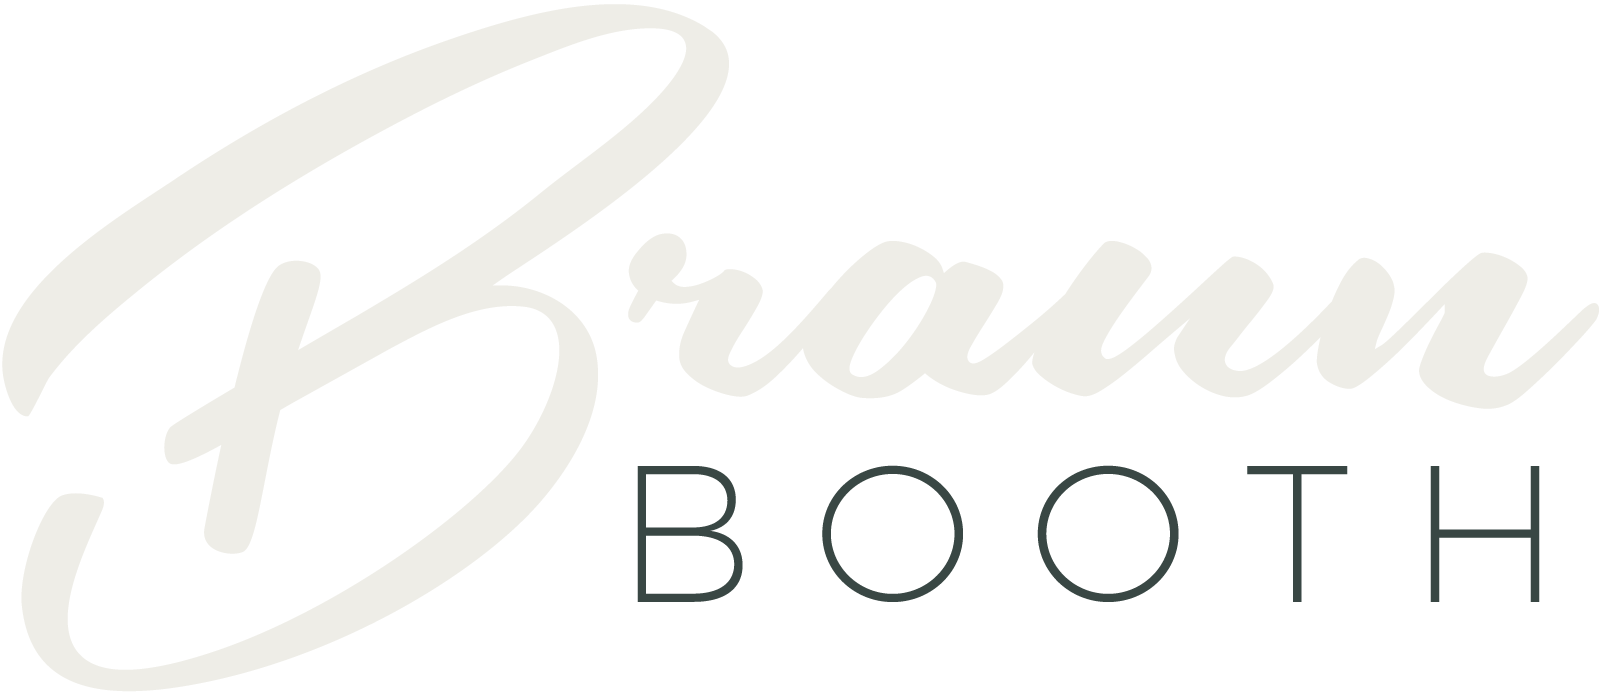 Braun Booth, the most stylish selfie booth in Ohio.